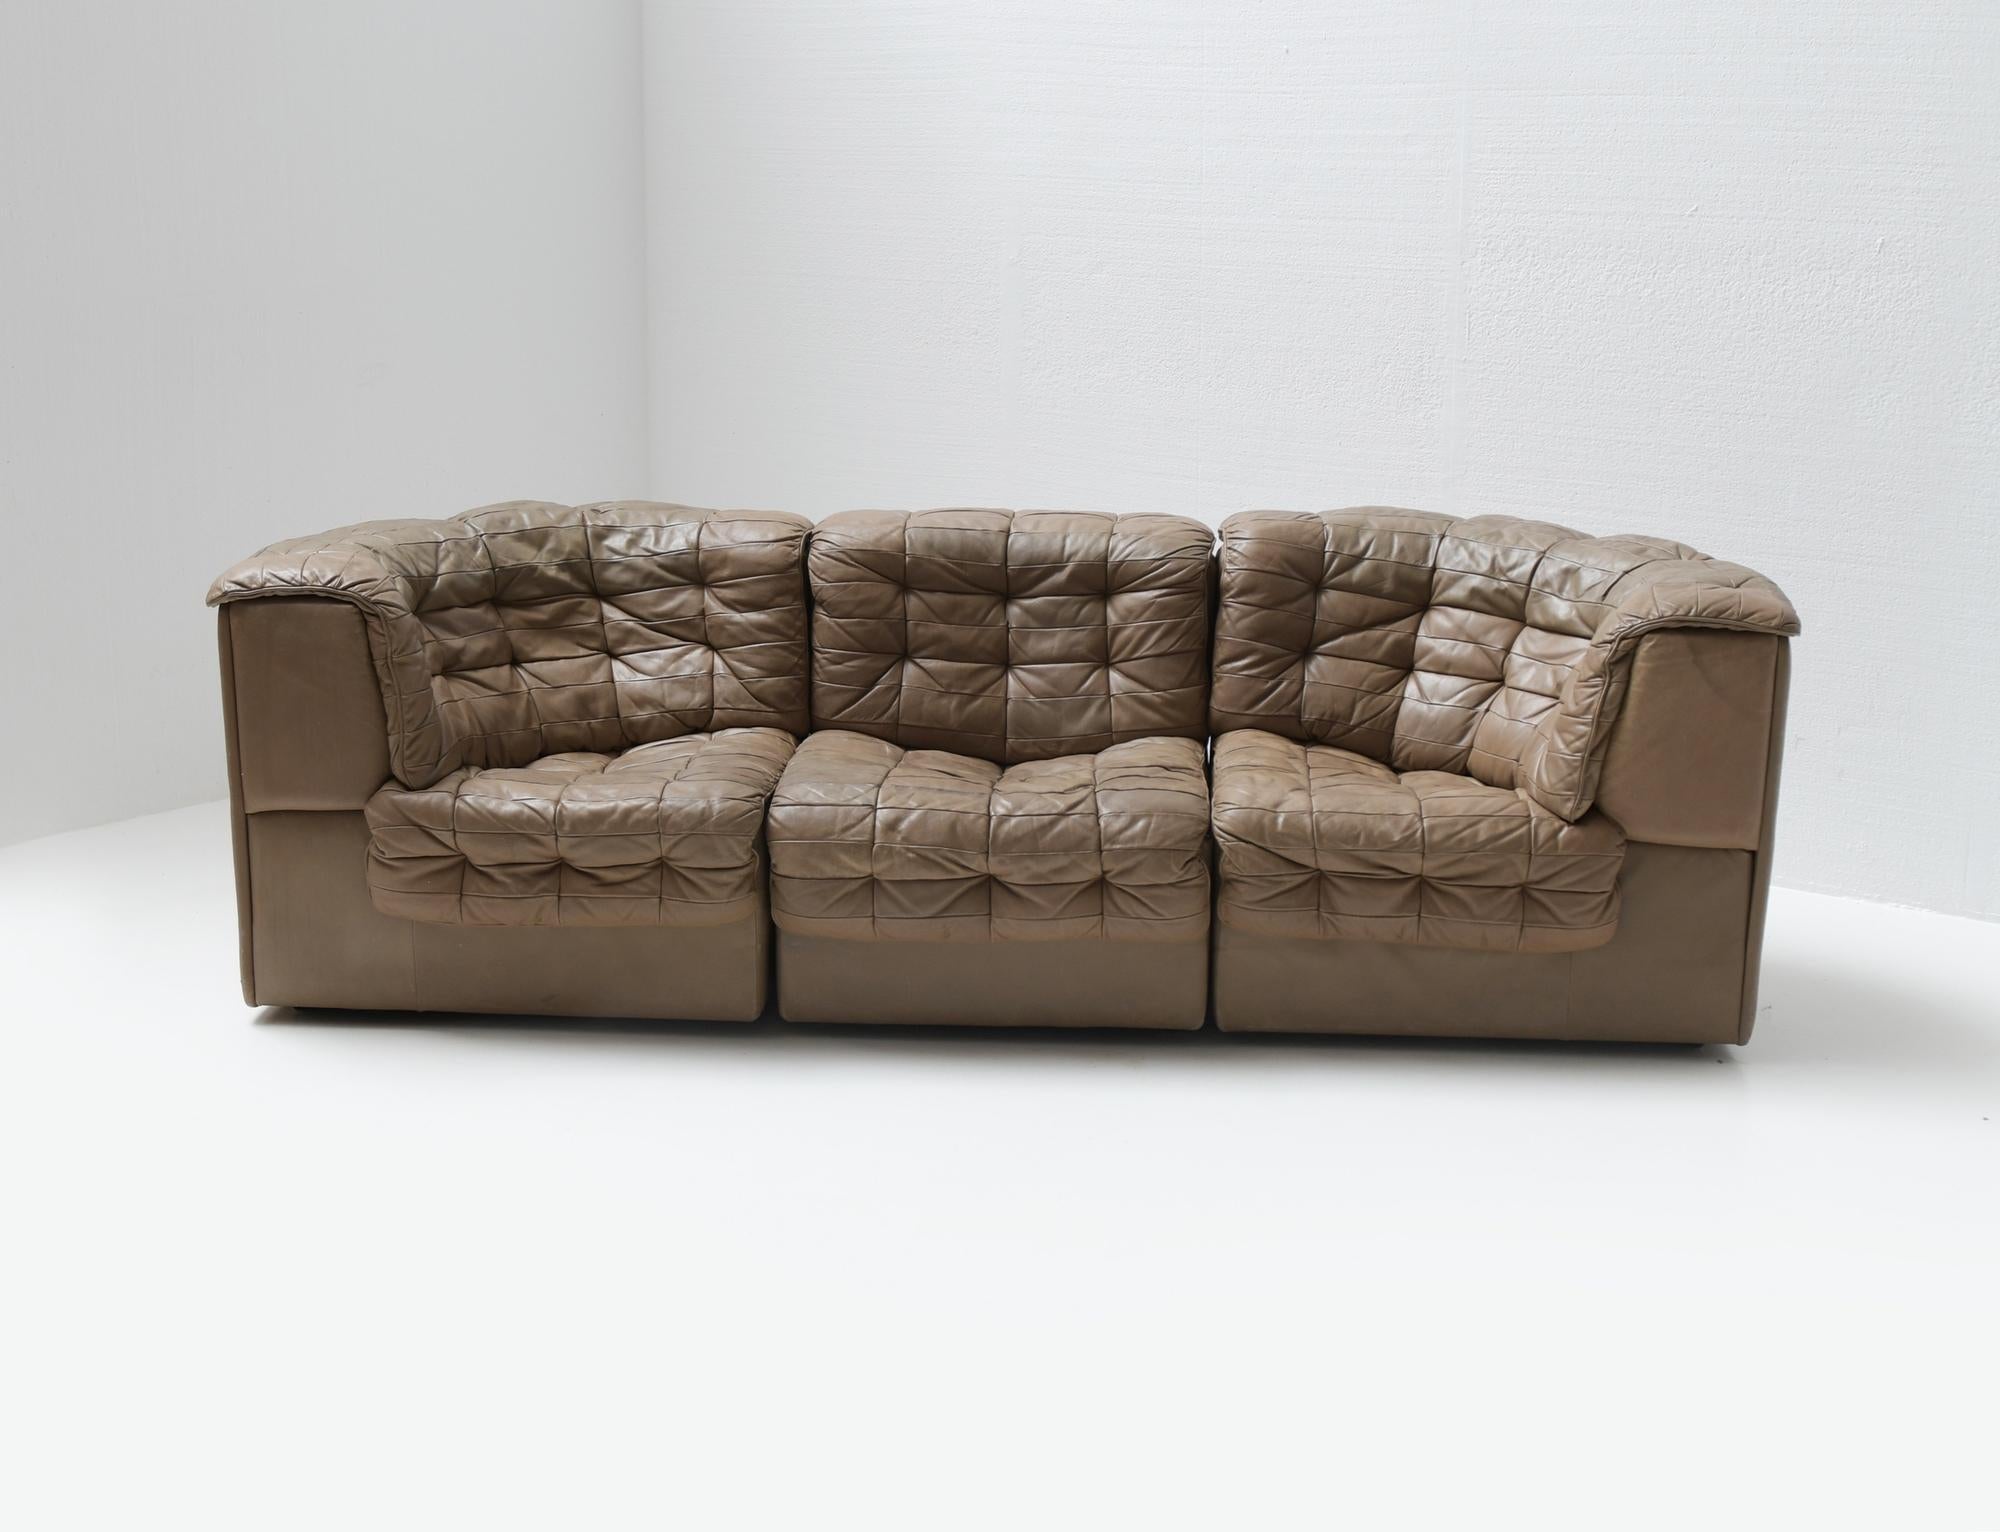 De Sede ‘DS-11’ Modular Patchwork sofa in beige leather.

Still 100% original.

This high-quality sectional sofa designed by De Sede in the 1970s contains one regular elements & two corner elements.
This makes it possible to arrange this sofa